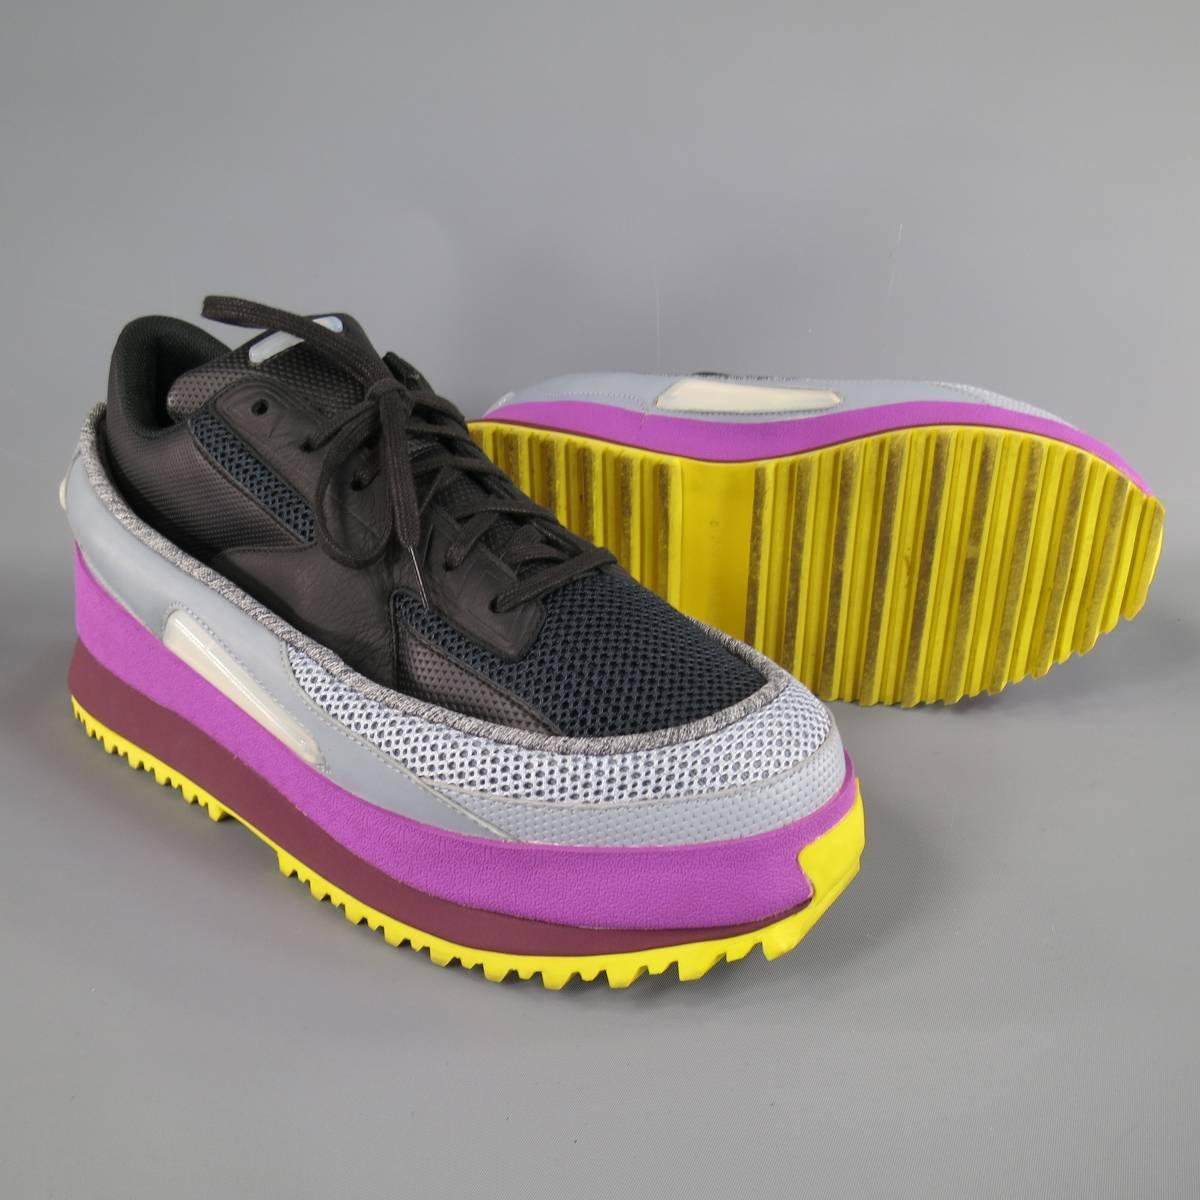 Limited Edition RAF SIMONS X ADIDAS stacked platform sneakers feature a black mesh and leather top with an outer layer of gray, orchid purple & burgundy rubber midsole, yellow sole, and light iridescent pads throughout. Runs Small.
 
Excellent